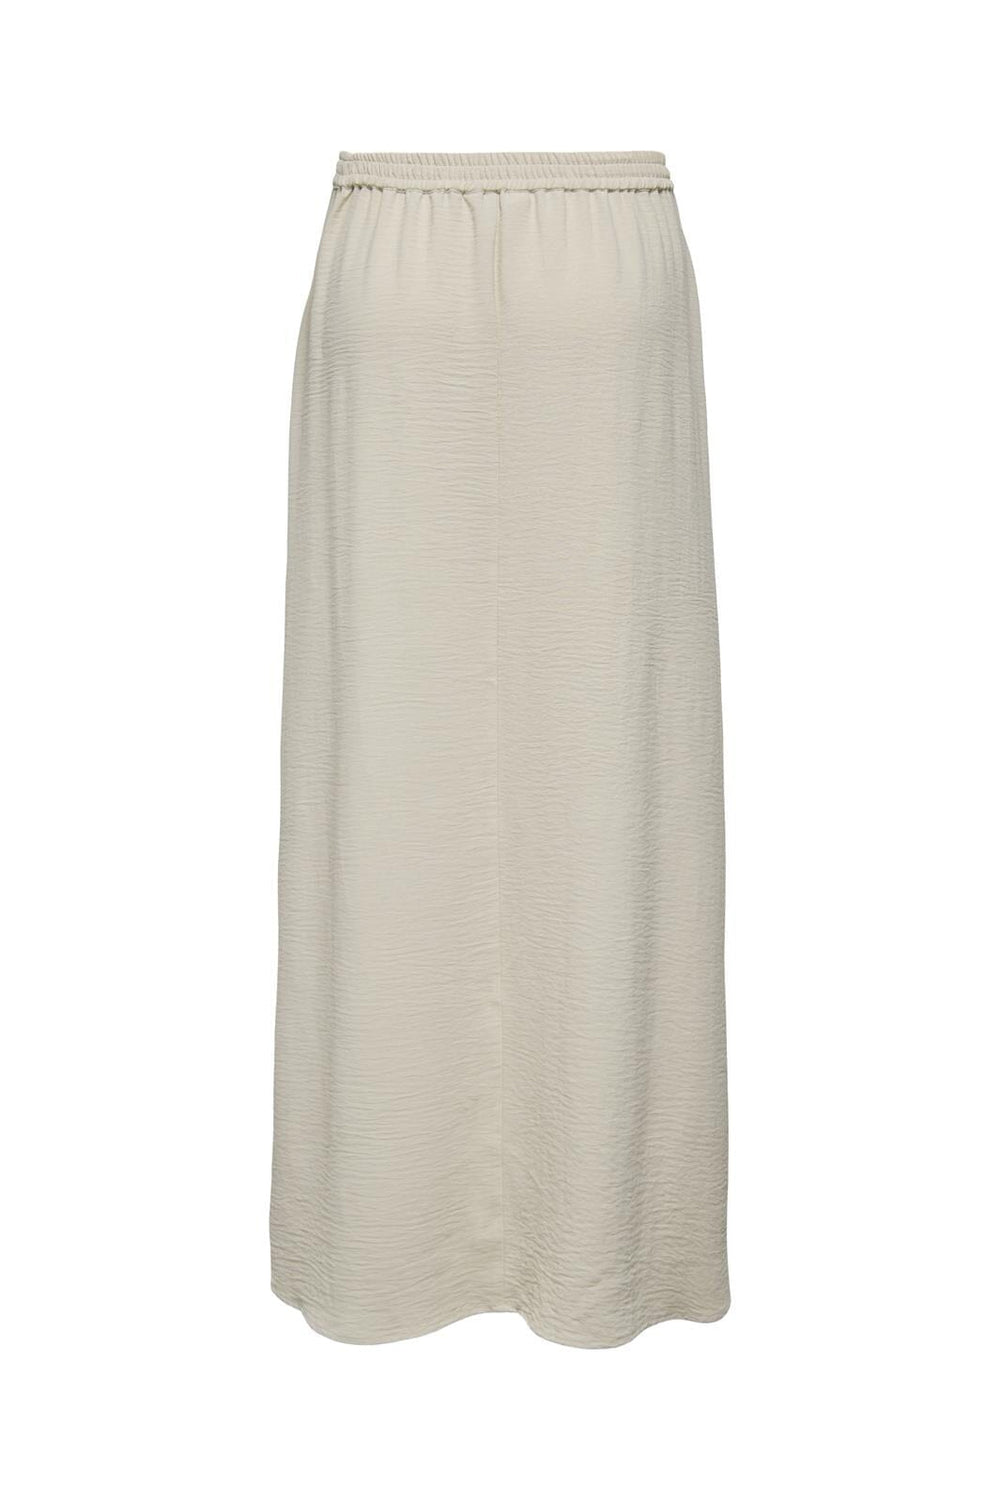 Only - Onlmette Life Long Skirt - 4497809 Pumice Stone